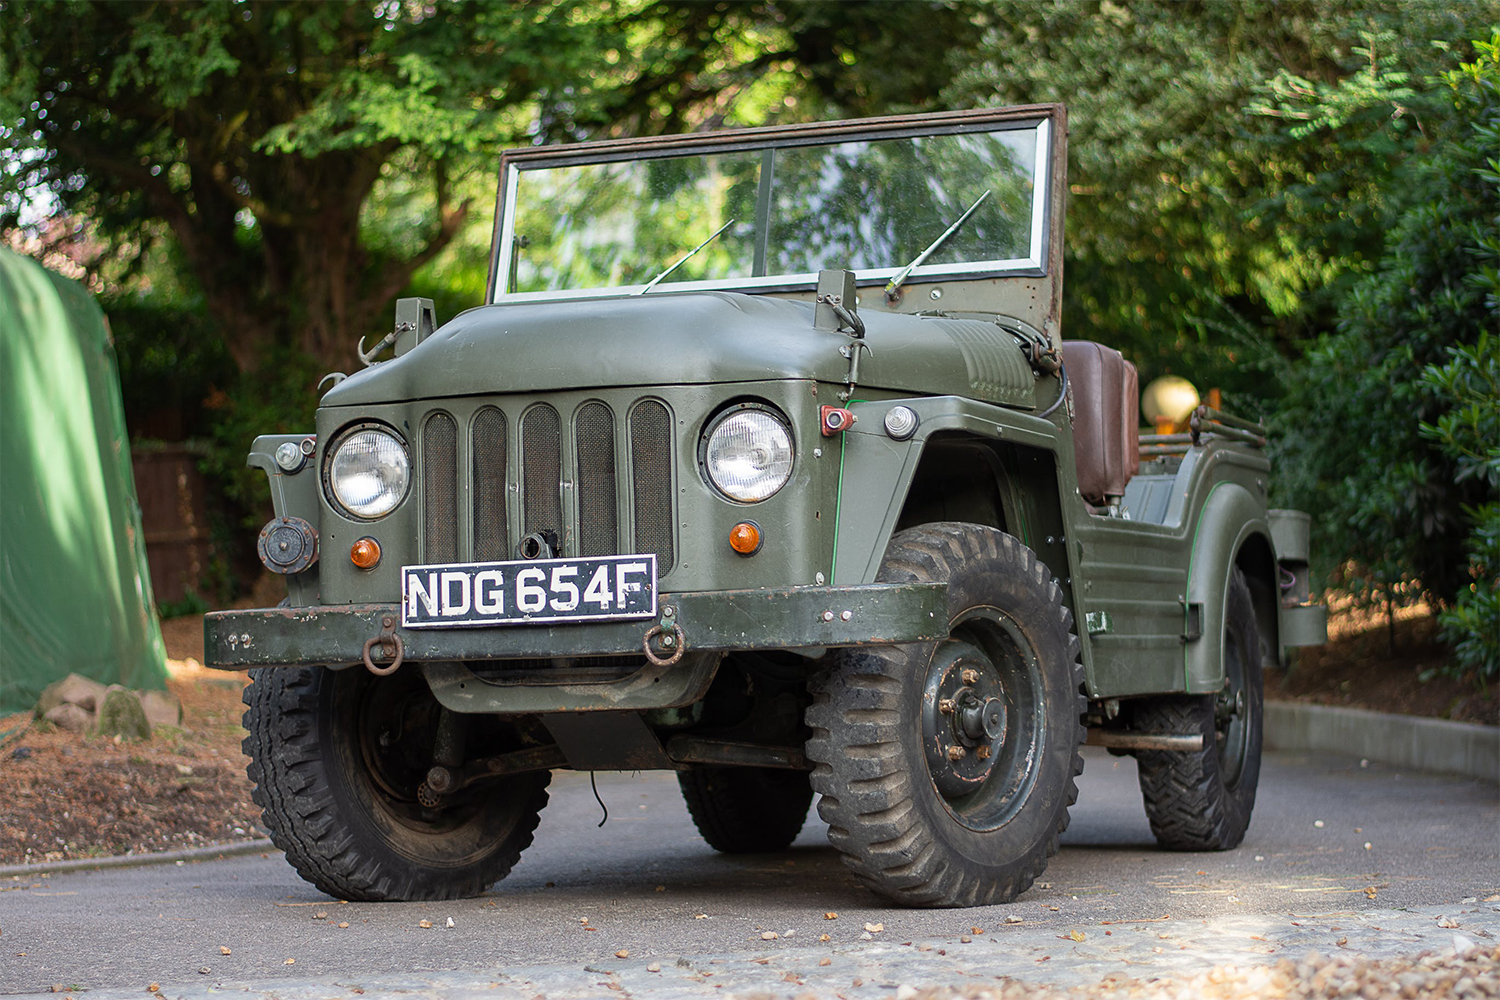 A 1952 Austin Champ off-roader from British outfit Austin Motor Company. The vehicle was built in response to the American jeeps of World War II, and this model was auctioned in August 2021.